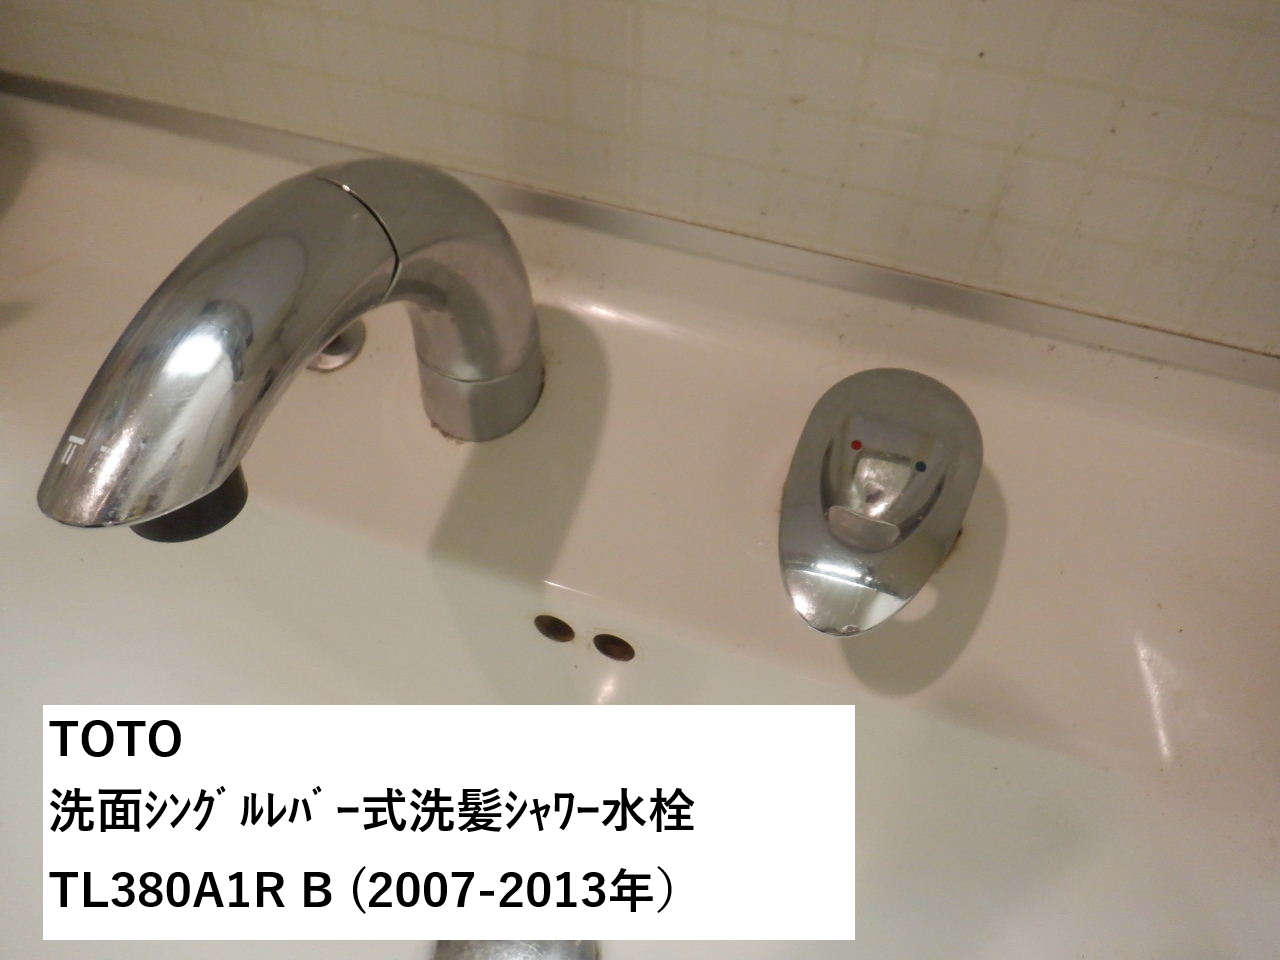 TOTO　TL380A1RBの水漏れ修理の方法